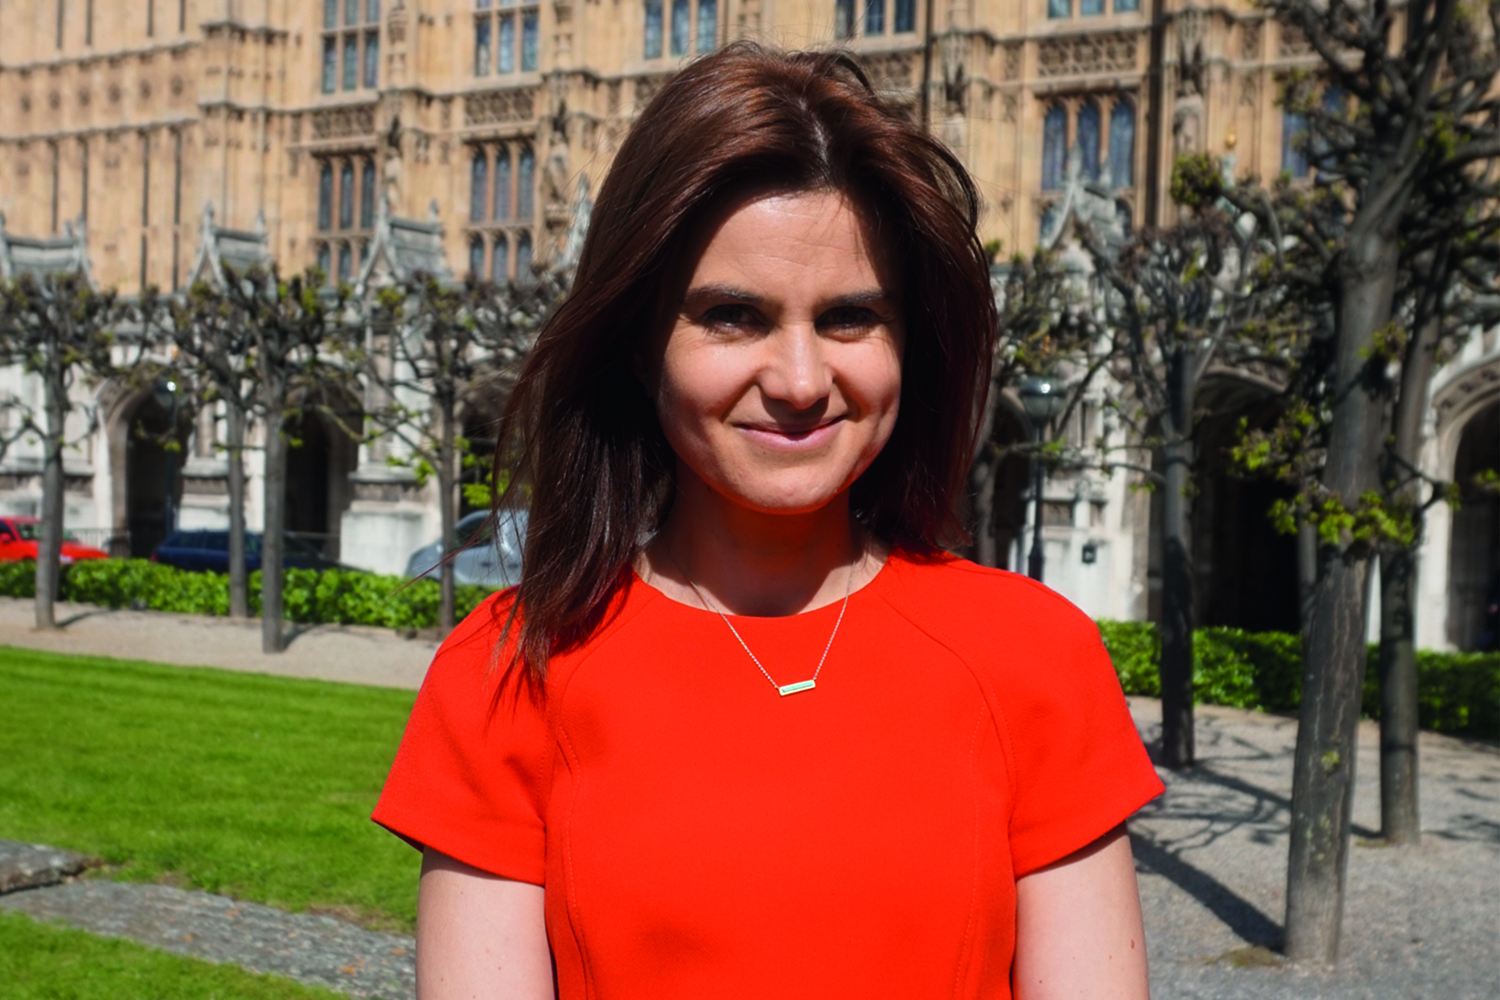 Jo Cox standing outside Parliament